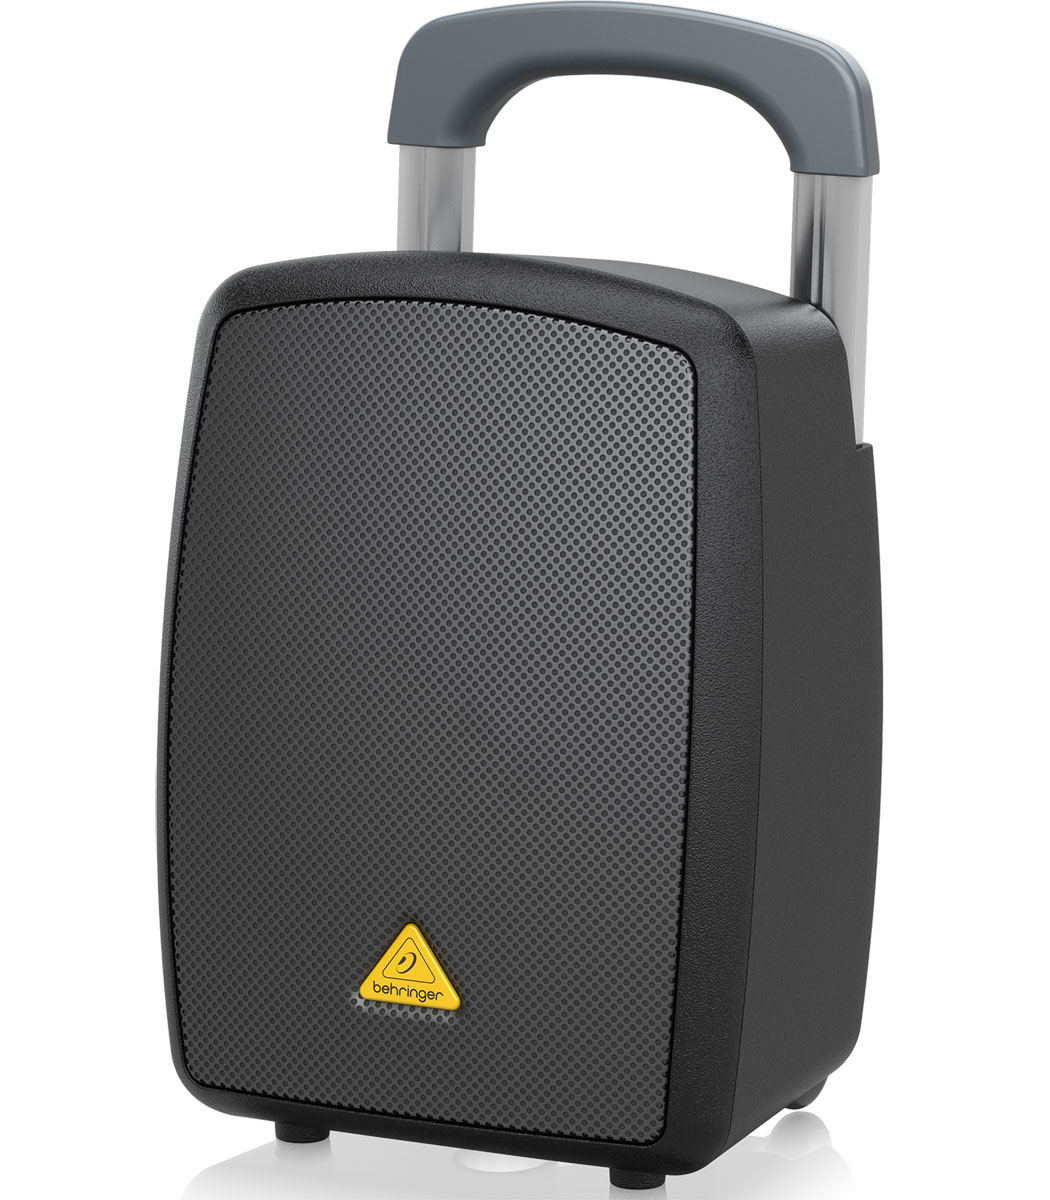 Behringer MPA40BT-PRO Portable PA System with Bluetooth